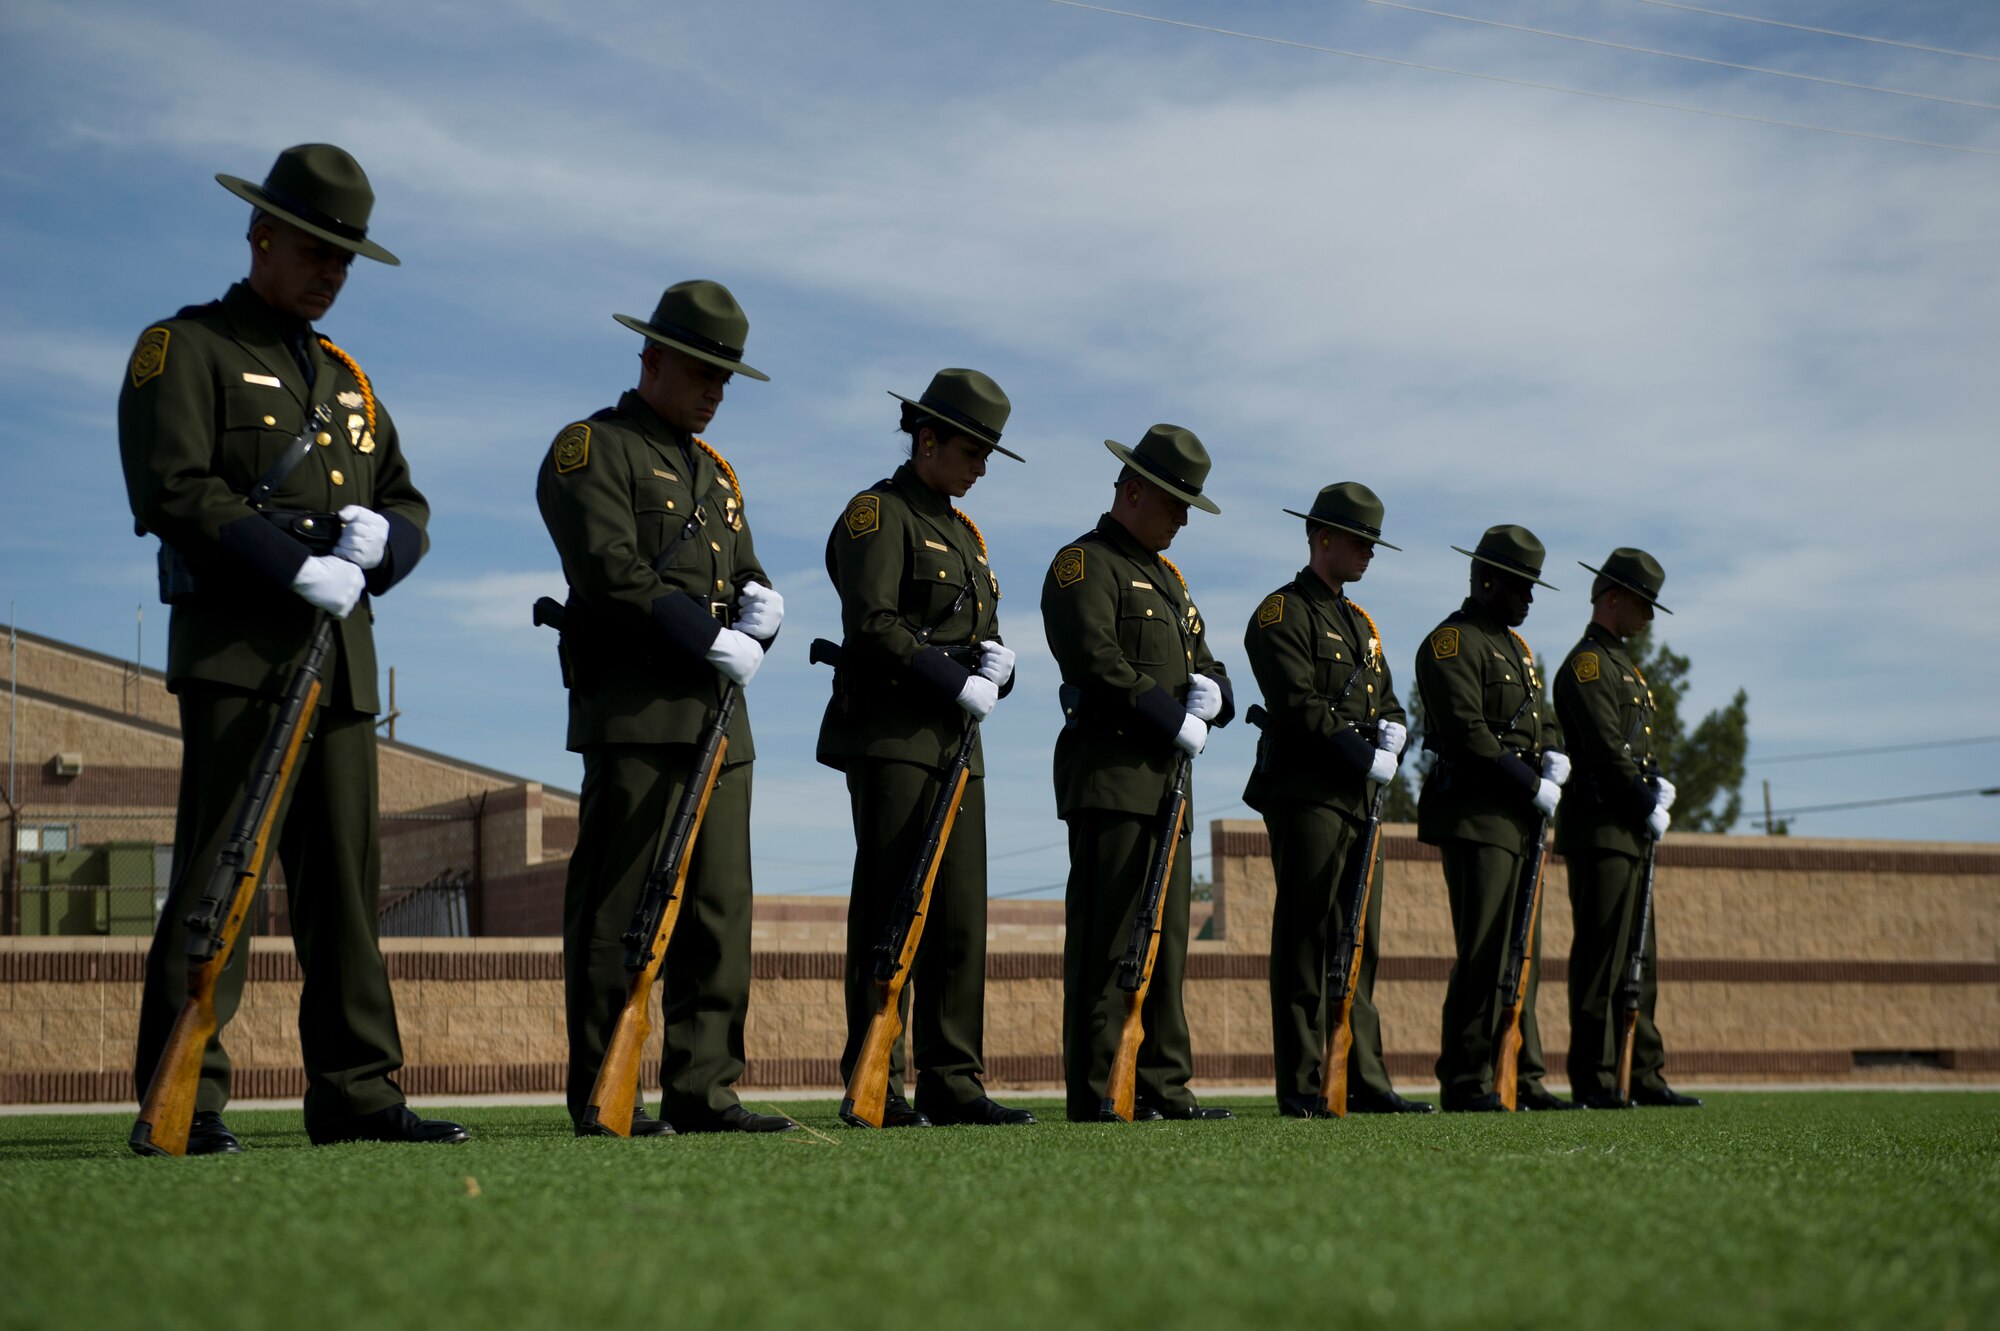 The U.S. Border Patrol Honor Guard stages in preparation for the 21-gun salute during the Police Week closing ceremony at Holloman Air Force Base, N.M., May 16. According to the National Police Week website, President John F.  Kennedy signed a proclamation in 1962 that designated May 15 as Peace Officers Memorial Day and the week in which that date falls as National Police Week. Since the inception of National Police Week, the United States Air Force has lost 120 military and civilian law enforcement officers. (U.S. Air Force photo by Airman 1st Class Aaron Montoya / Released)